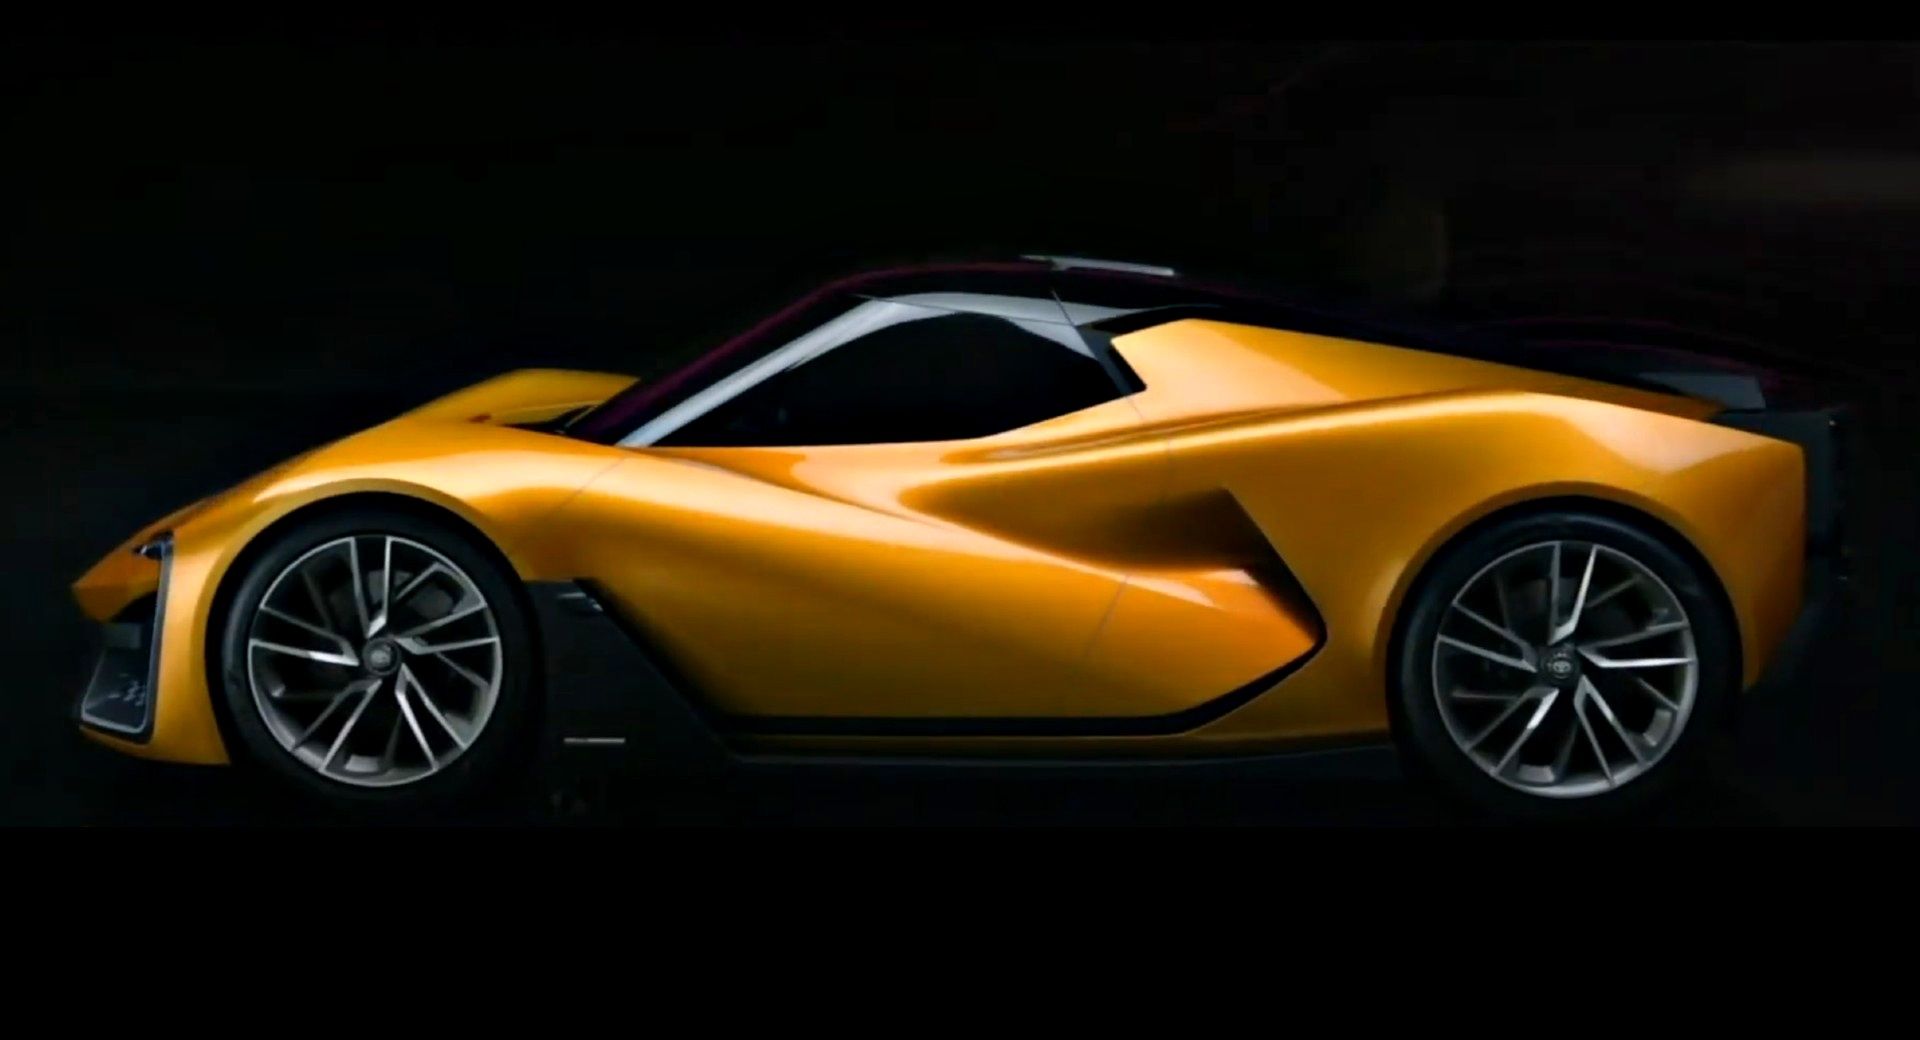 Rumor: Toyota and Suzuki Teaming Up on a Lightweight Sports Car